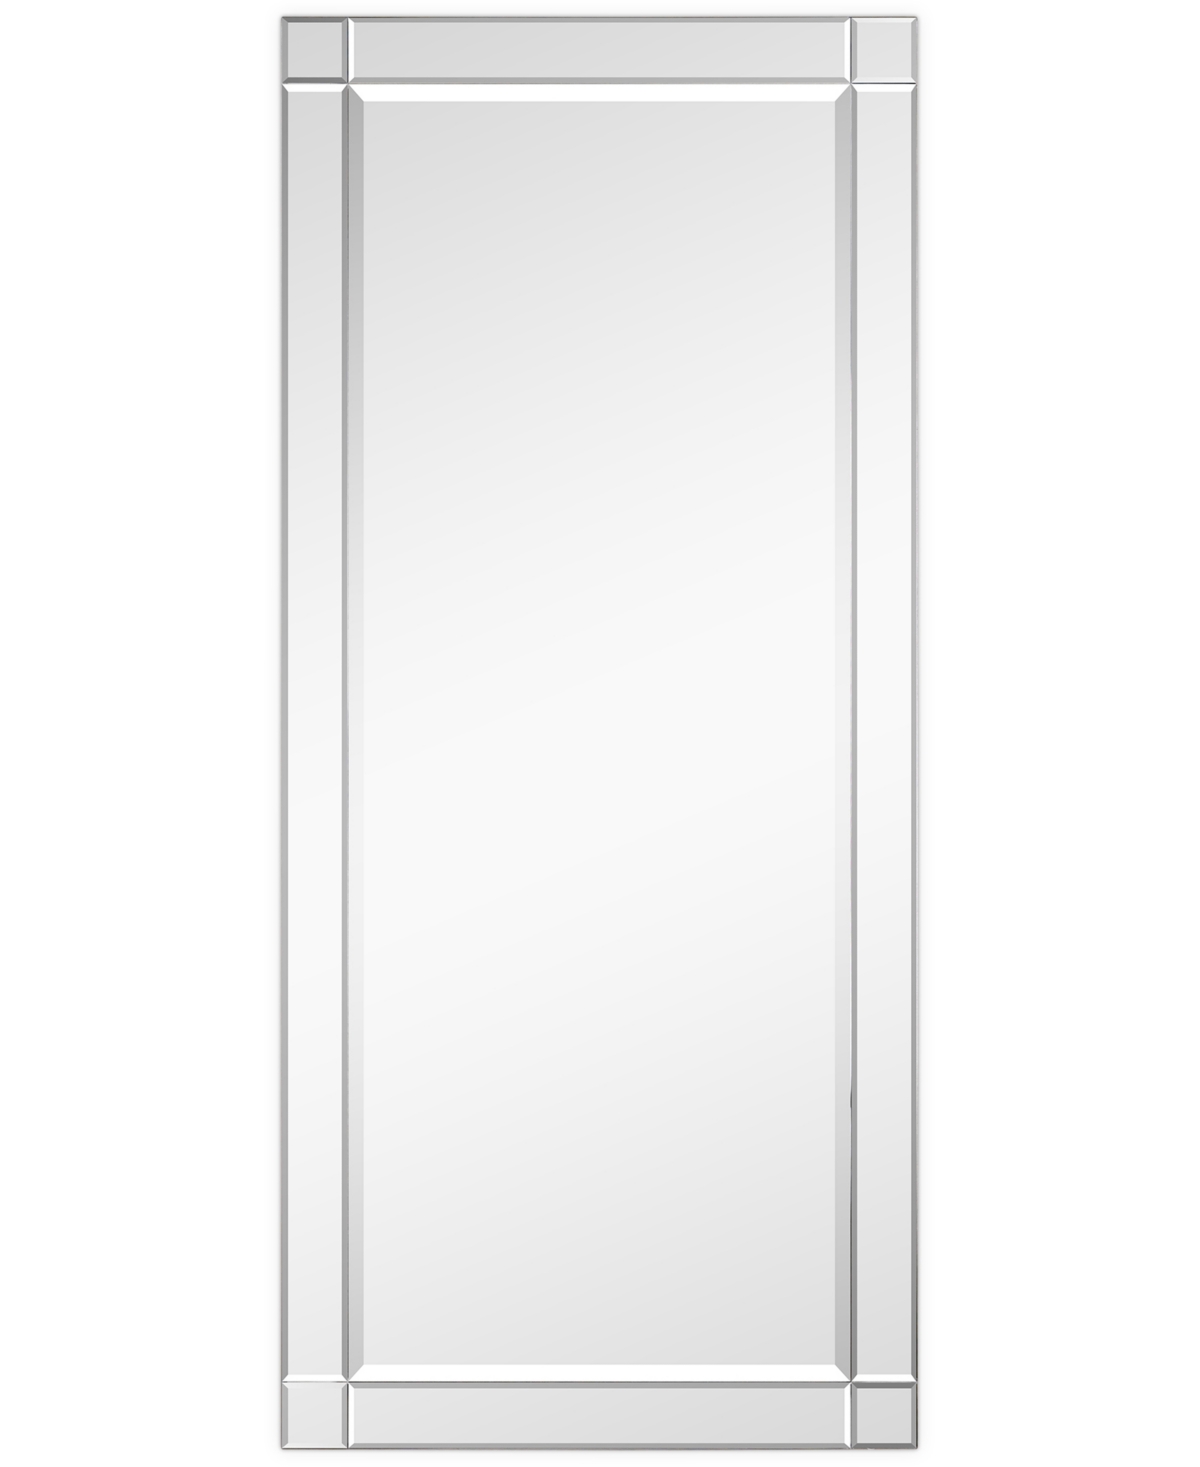 Moderno Squared Corner Beveled Rectangle Wall Mirror, 54" x 24" x 1.18" - Clear